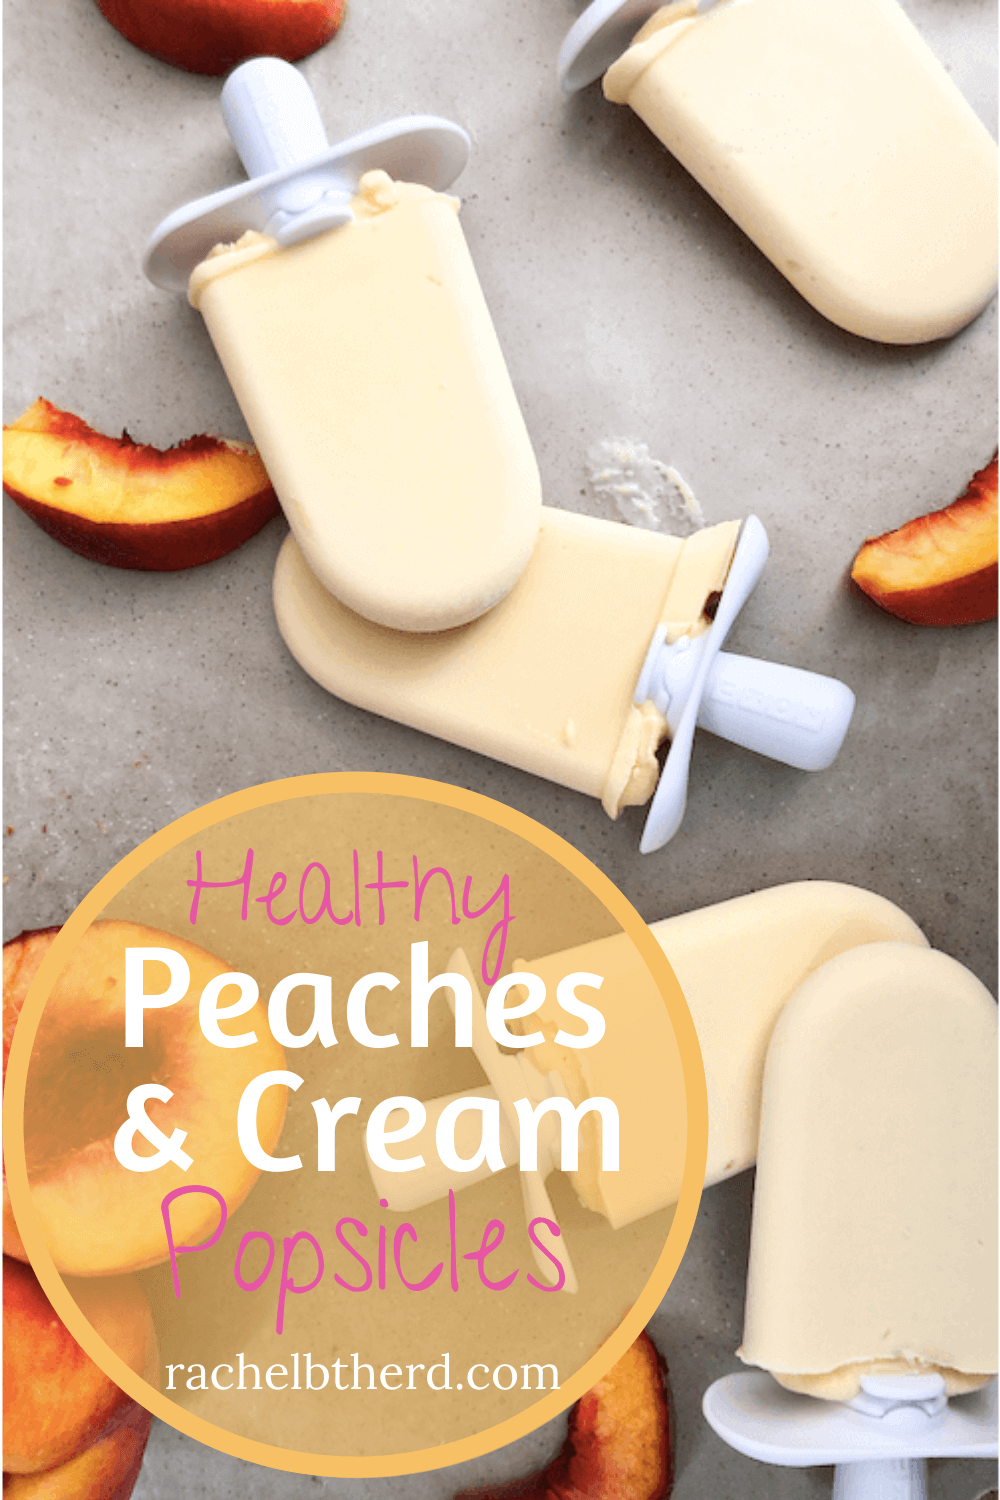 Homemade peaches and cream popsicles made with fresh peaches